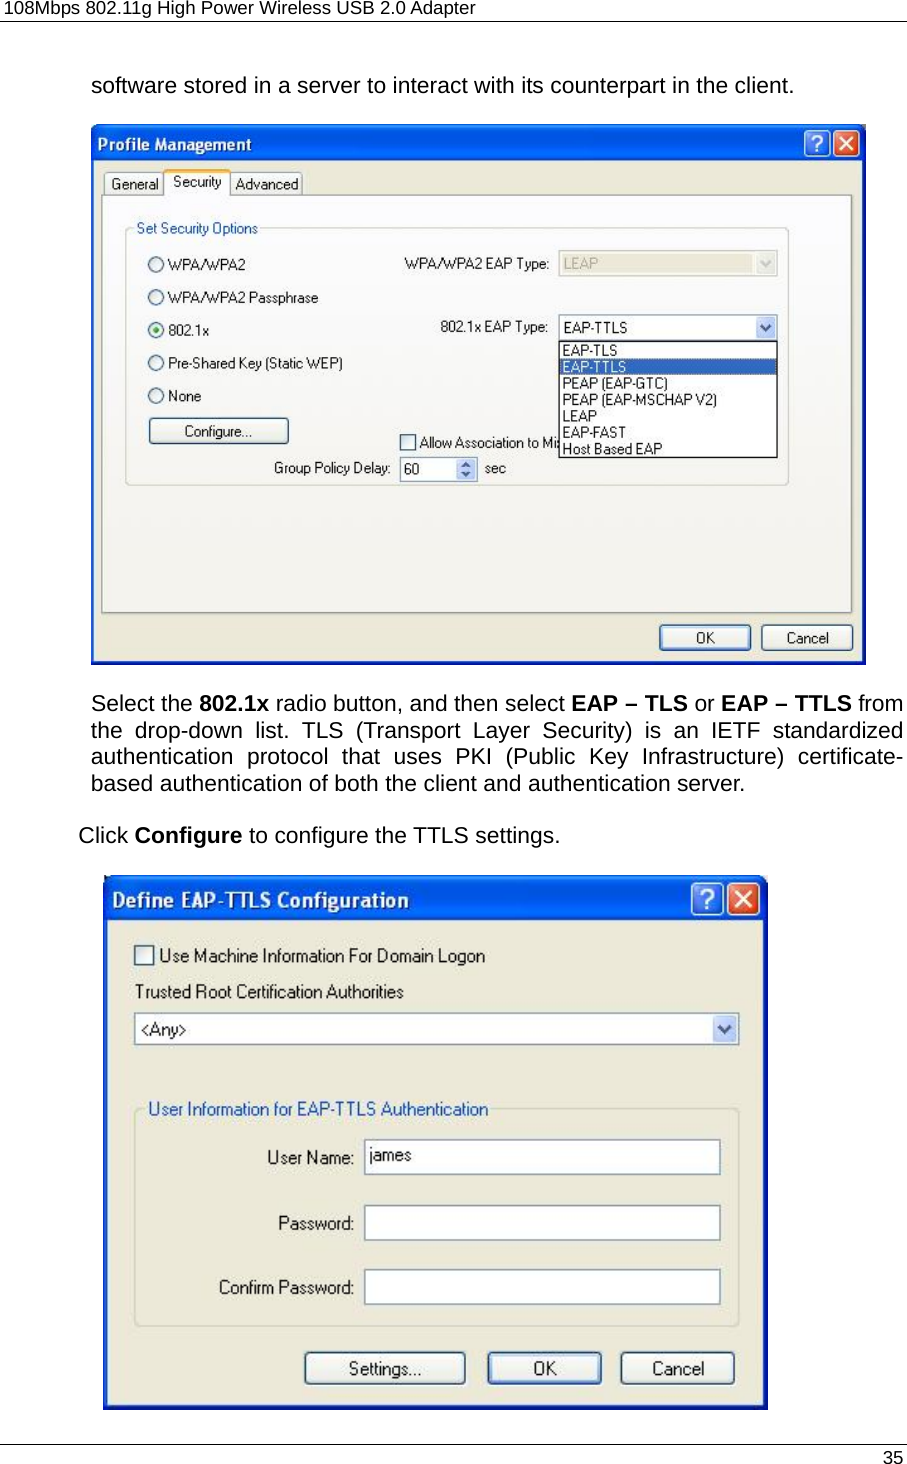 108Mbps 802.11g High Power Wireless USB 2.0 Adapter       35  software stored in a server to interact with its counterpart in the client.    Select the 802.1x radio button, and then select EAP – TLS or EAP – TTLS from the drop-down list. TLS (Transport Layer Security) is an IETF standardized authentication protocol that uses PKI (Public Key Infrastructure) certificate-based authentication of both the client and authentication server.  Click Configure to configure the TTLS settings.   